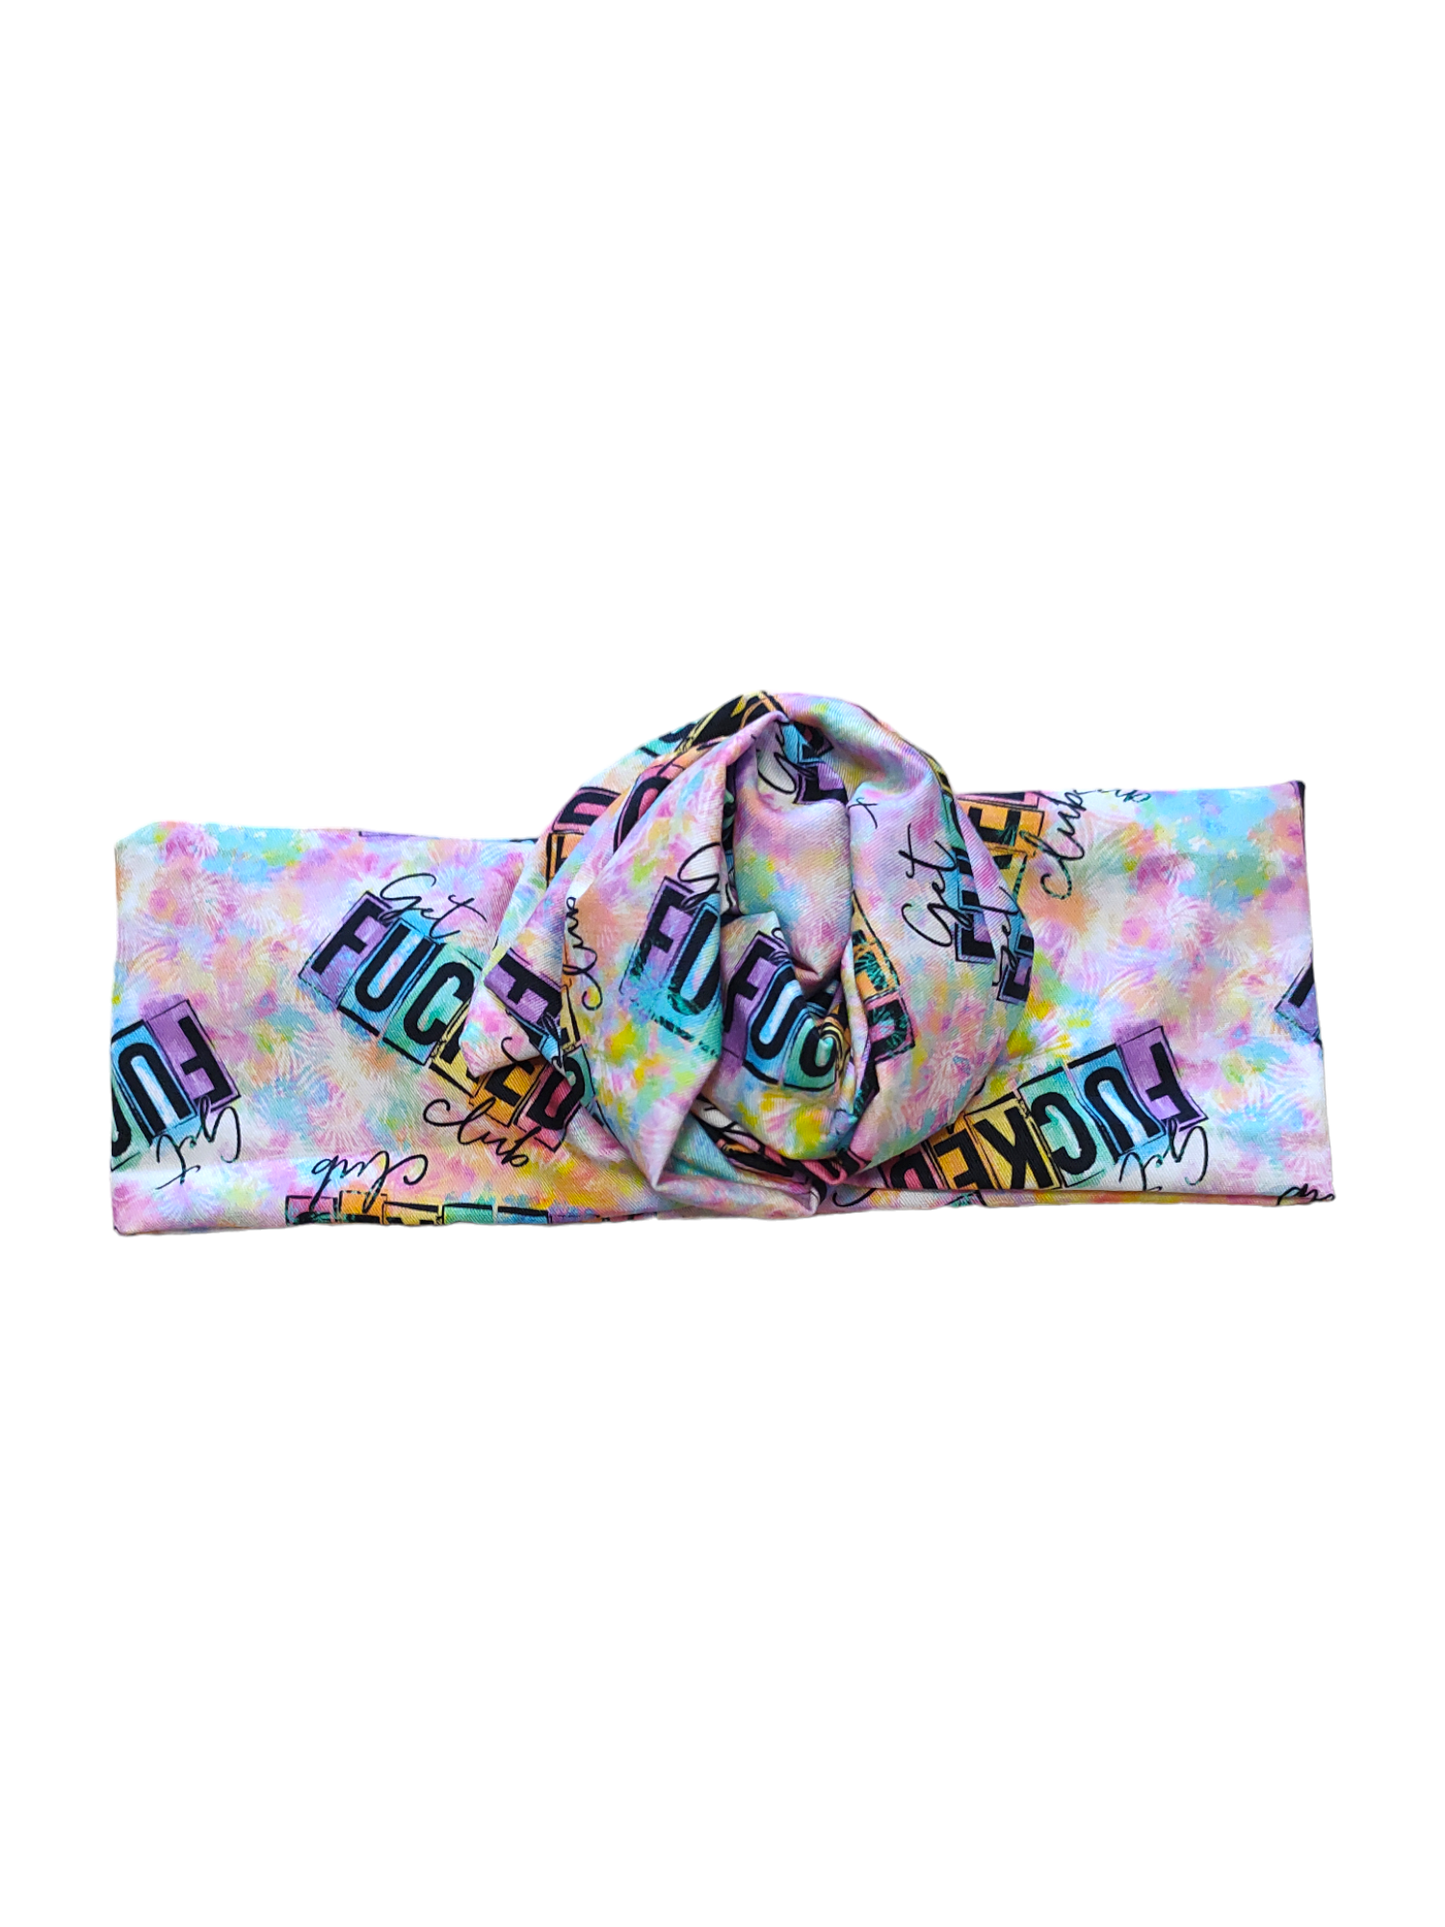 BETTY BOO BANDS™ WIRED HEADWRAP | 18+ Swear Band | Get F*cked Club | Pastel Rainbow